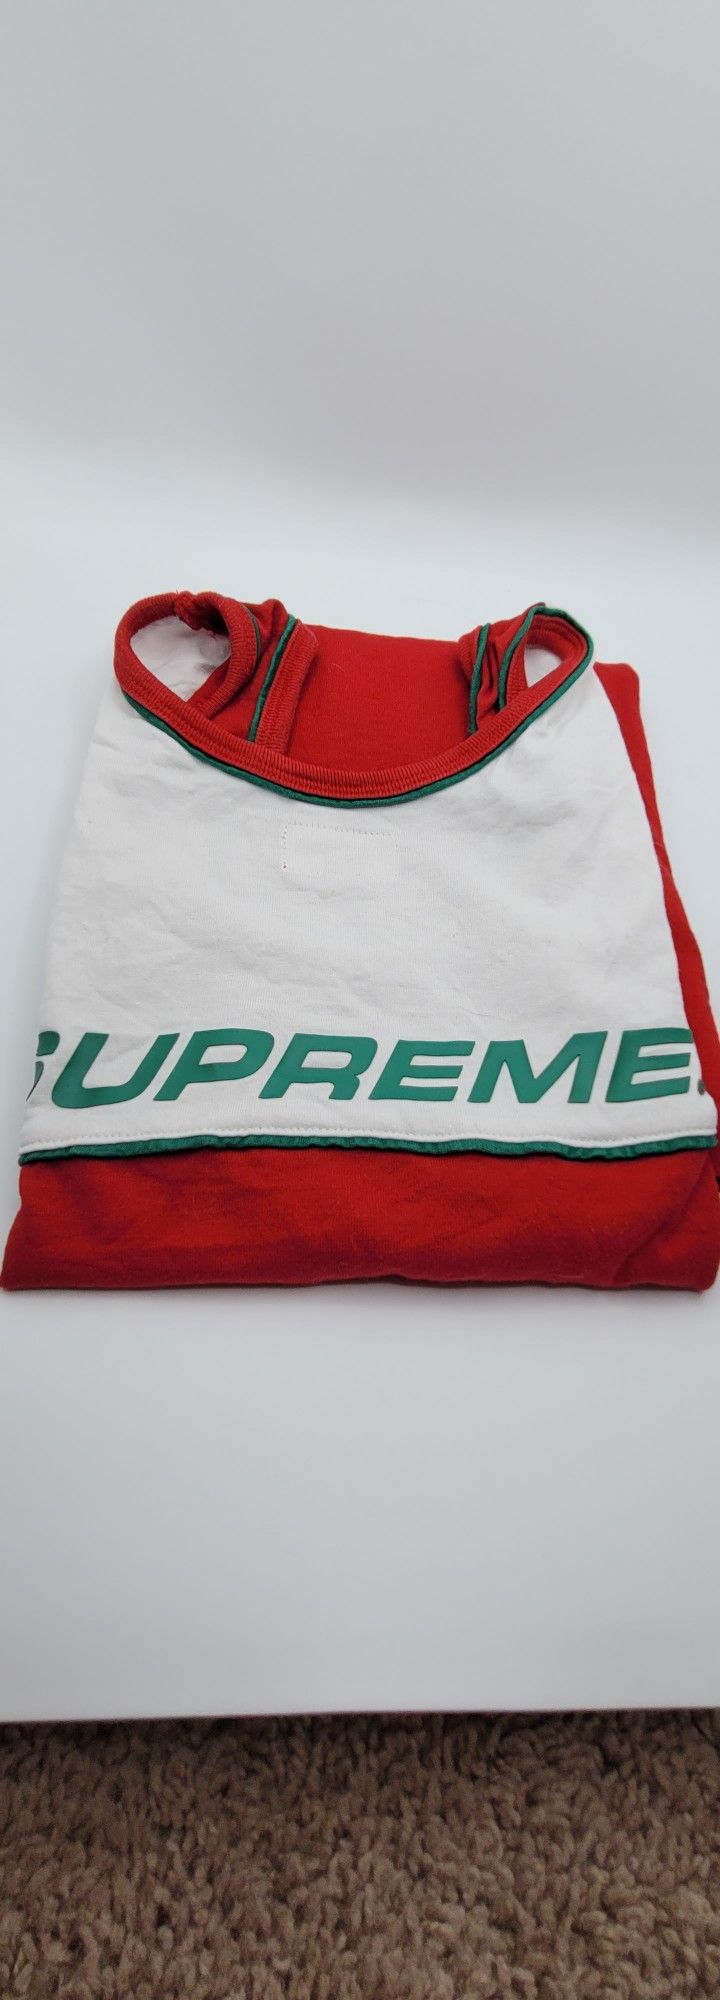 Supreme Red Piping Tank Top Size Large 